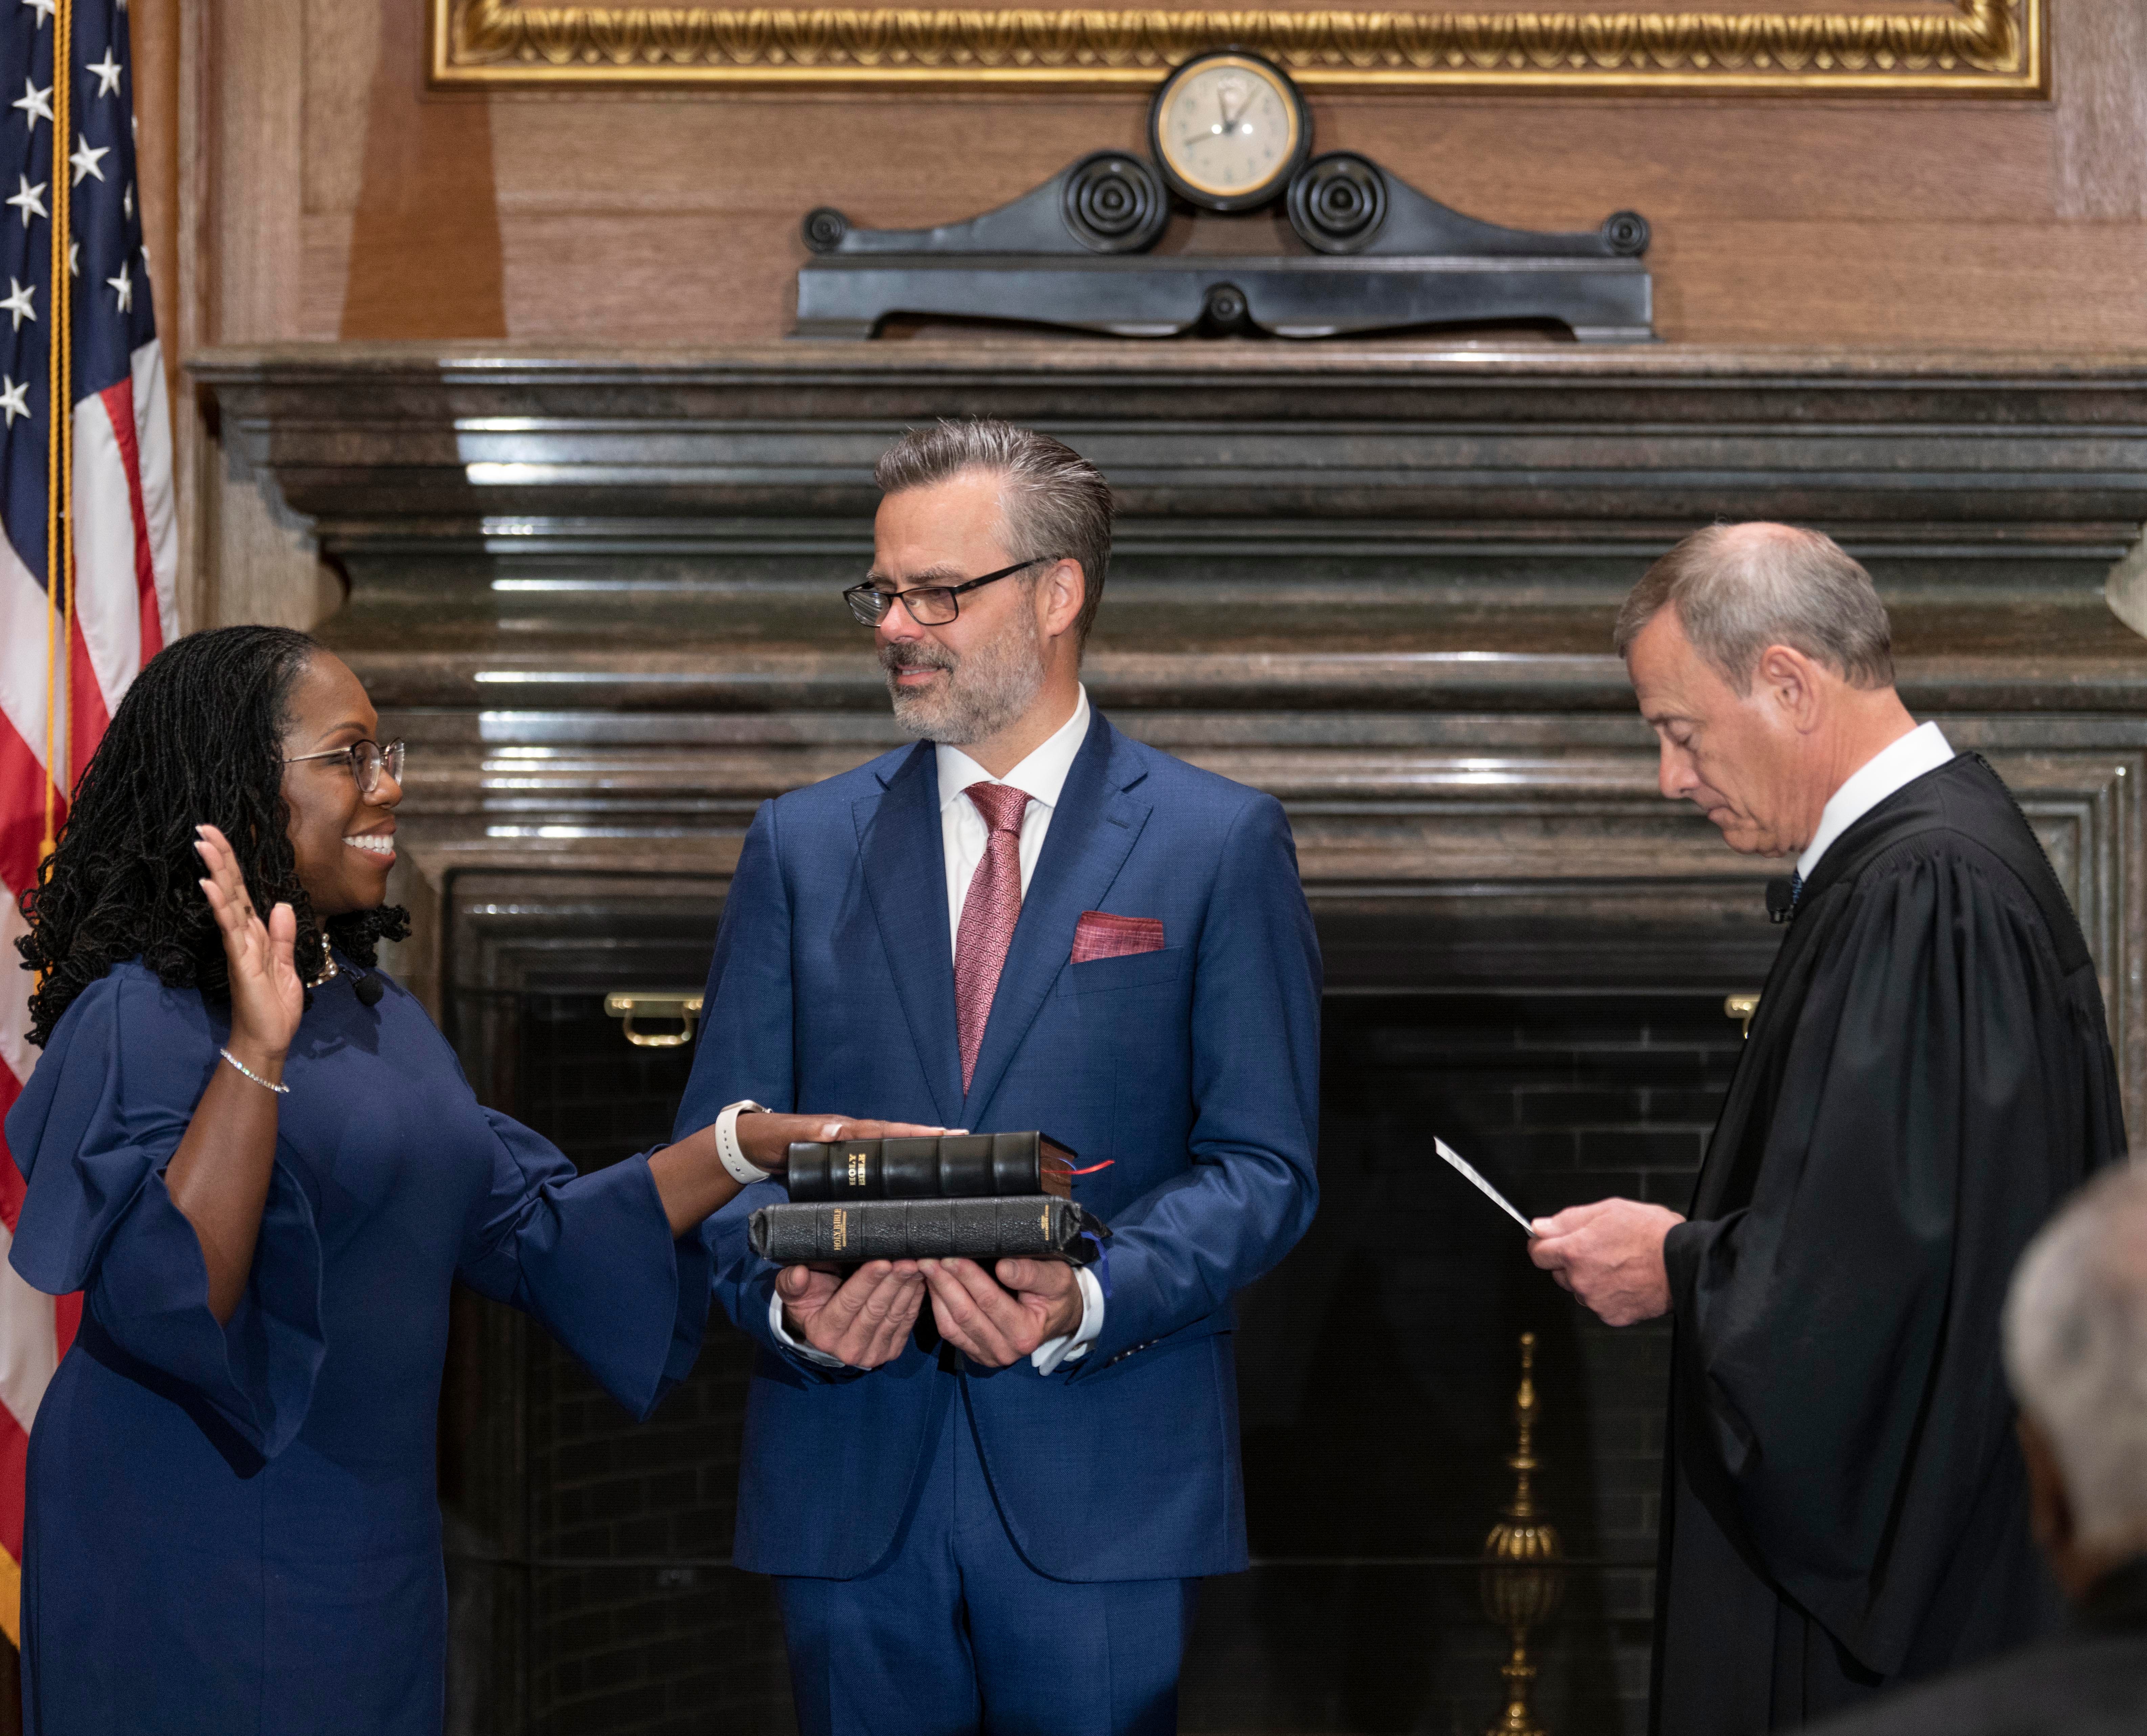 Chief Justice John Roberts swears in Justice Ketanji Brown Jackson, accompanied by her husband, Dr. Patrick Jackson.